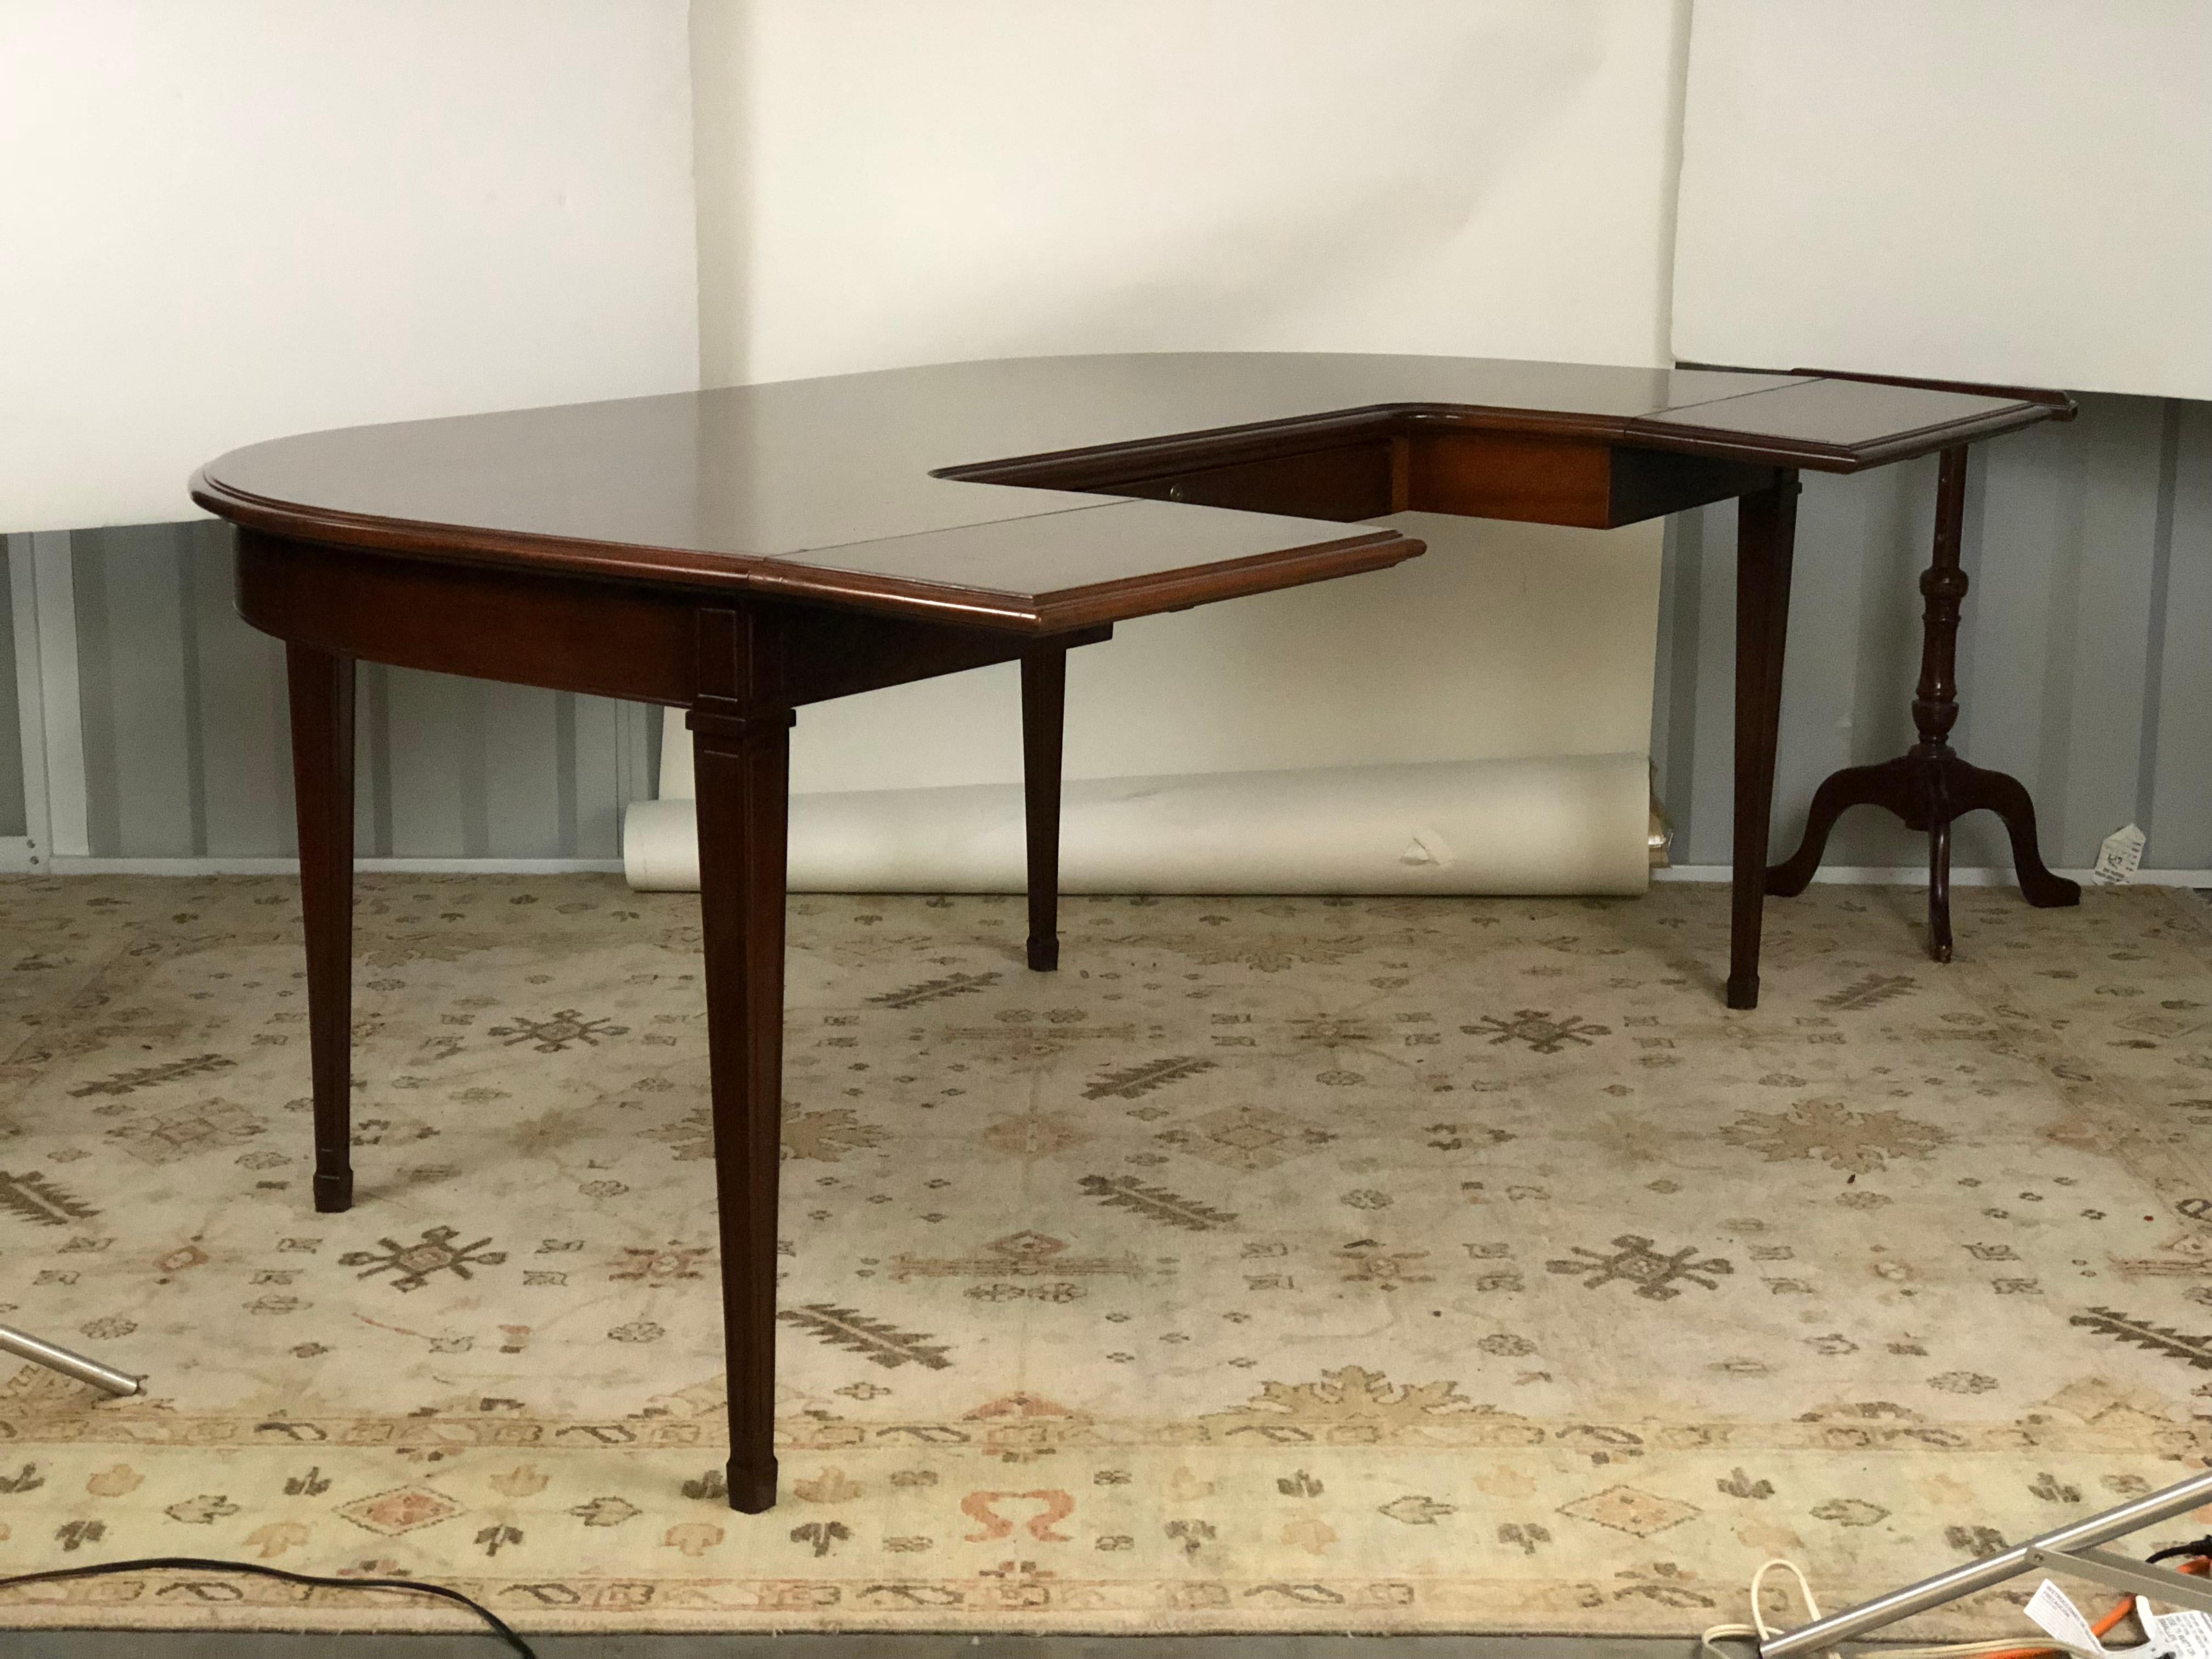 20th century American mahogany demilune shaped desk or writing table with drop-leaf extensions flanking a fitted drawer in the frieze. The table is raised on tapered legs and spade feet. The desk opens to 46.25 inches deep when the leaves are fully